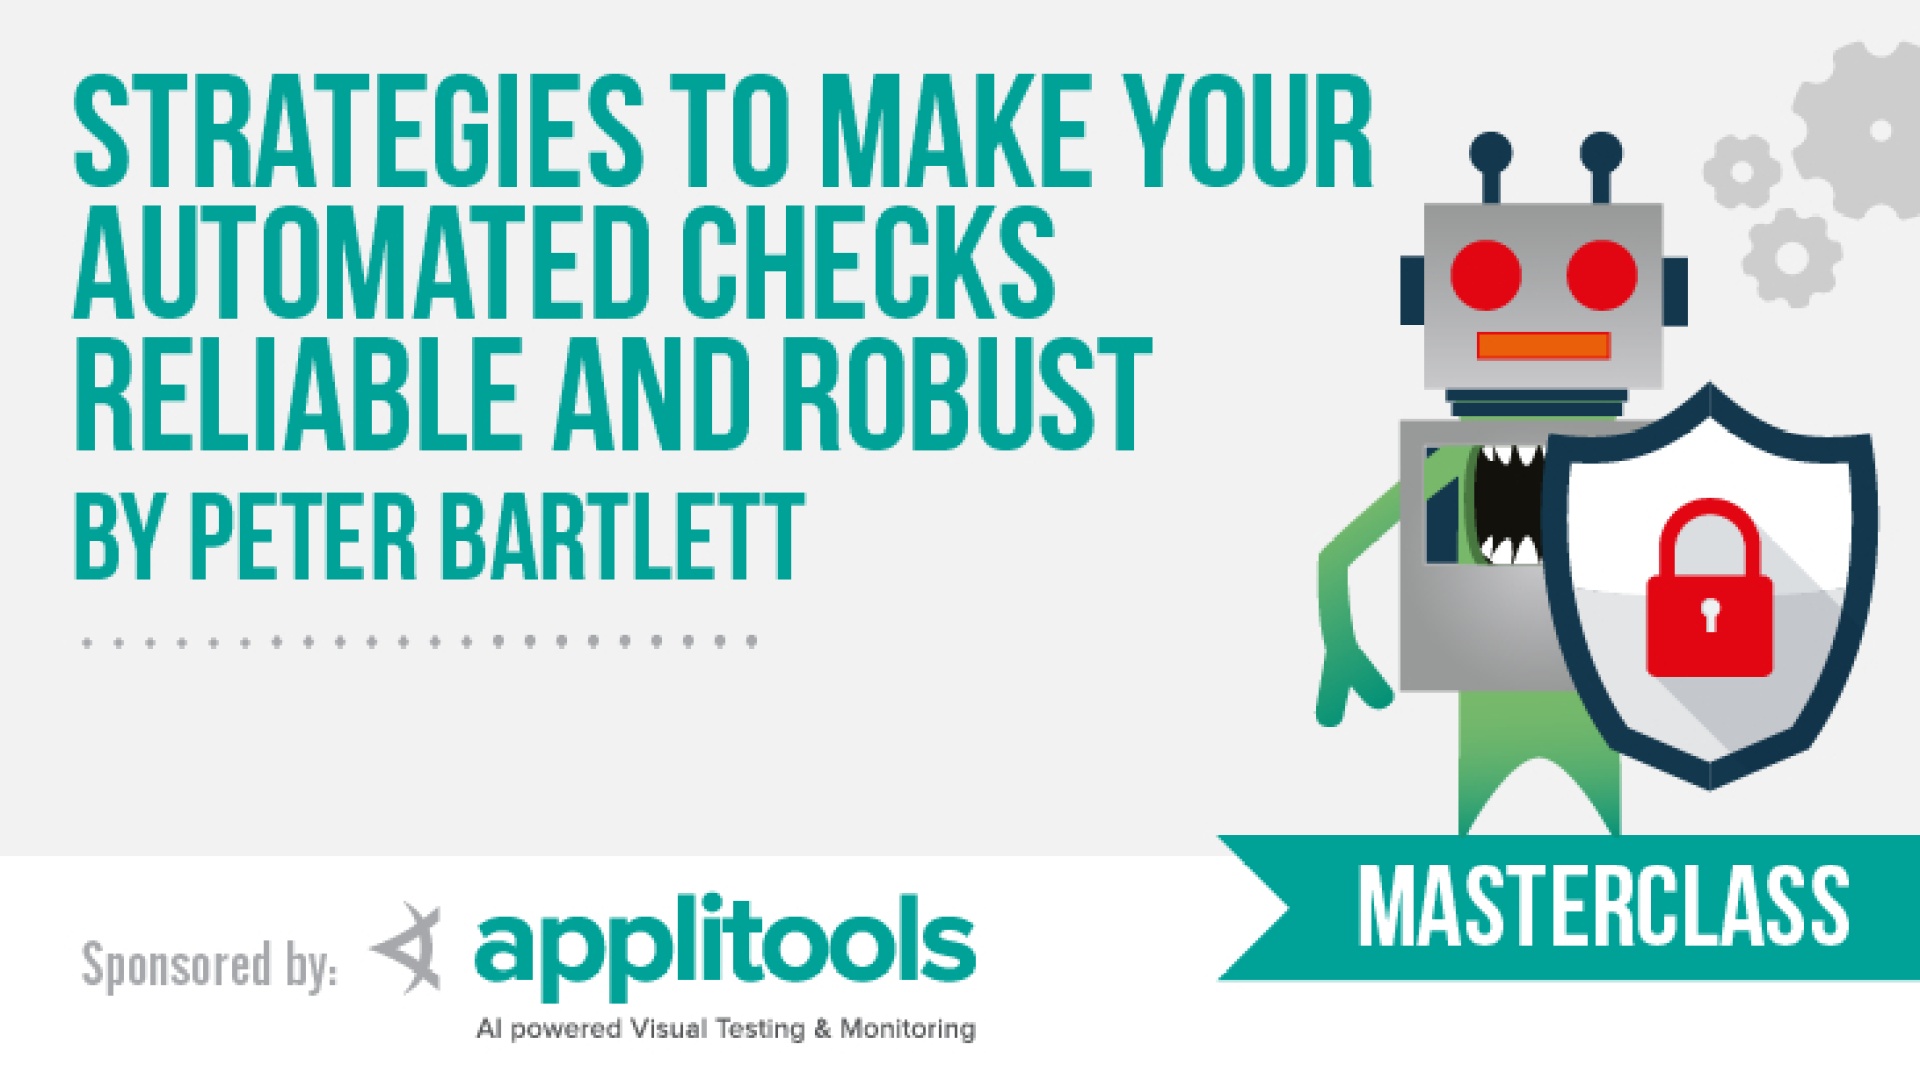 Strategies to Make Your Automated Checks Reliable and Robust